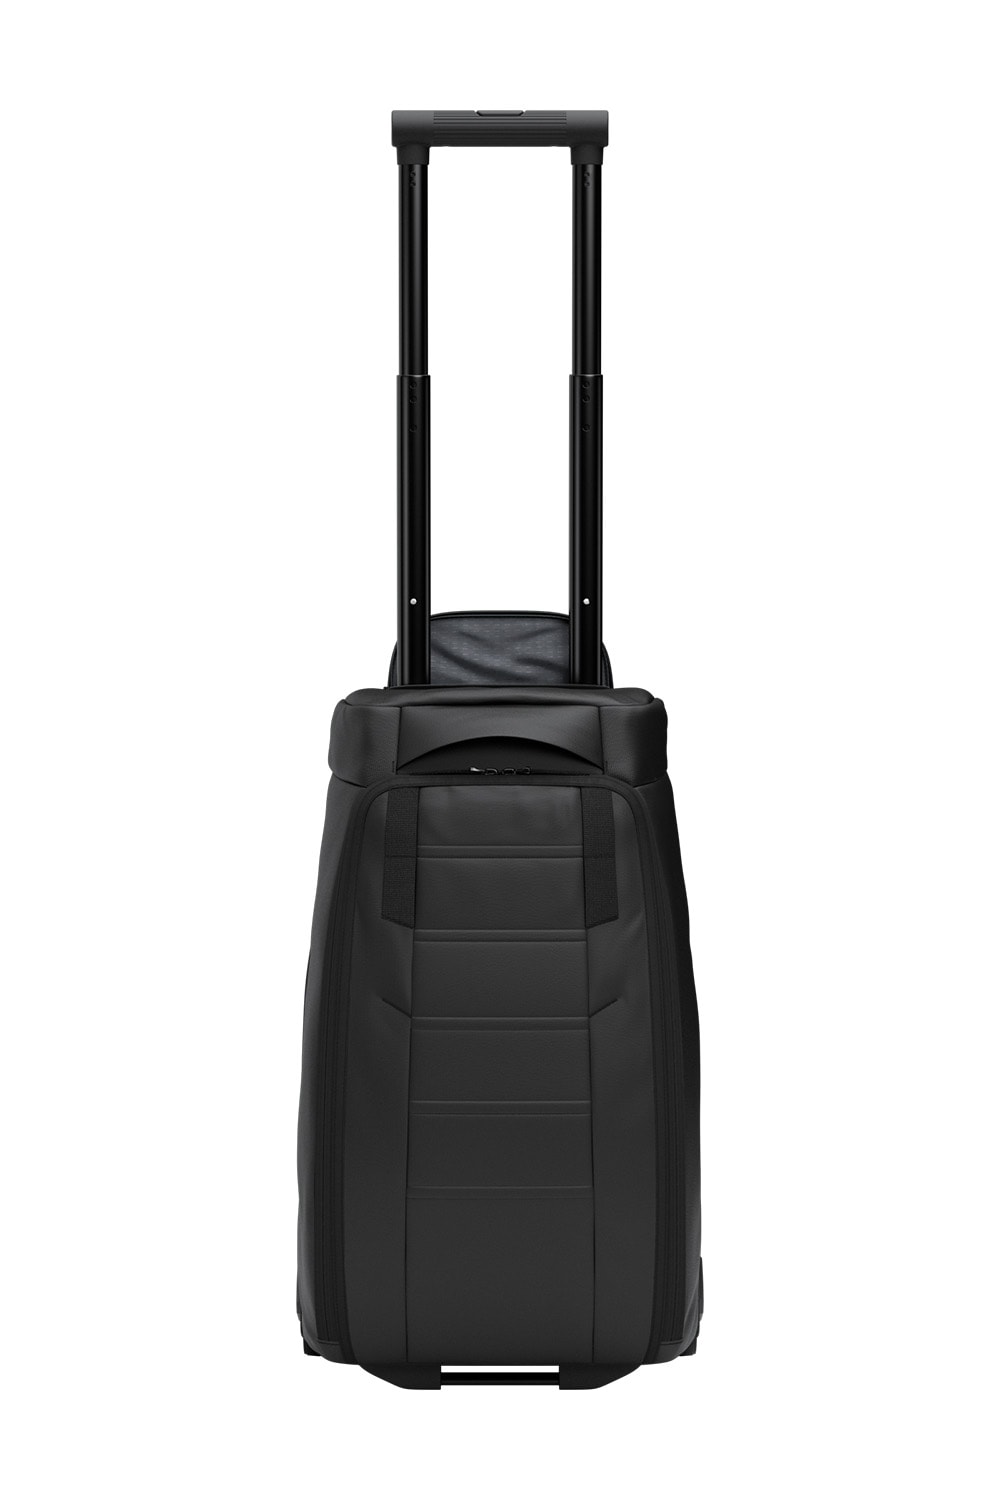 Db Launches Hugger Carry-on 40L Carry-on IATA Approved Cabin Bag Luggage Travel Scandinavian Design